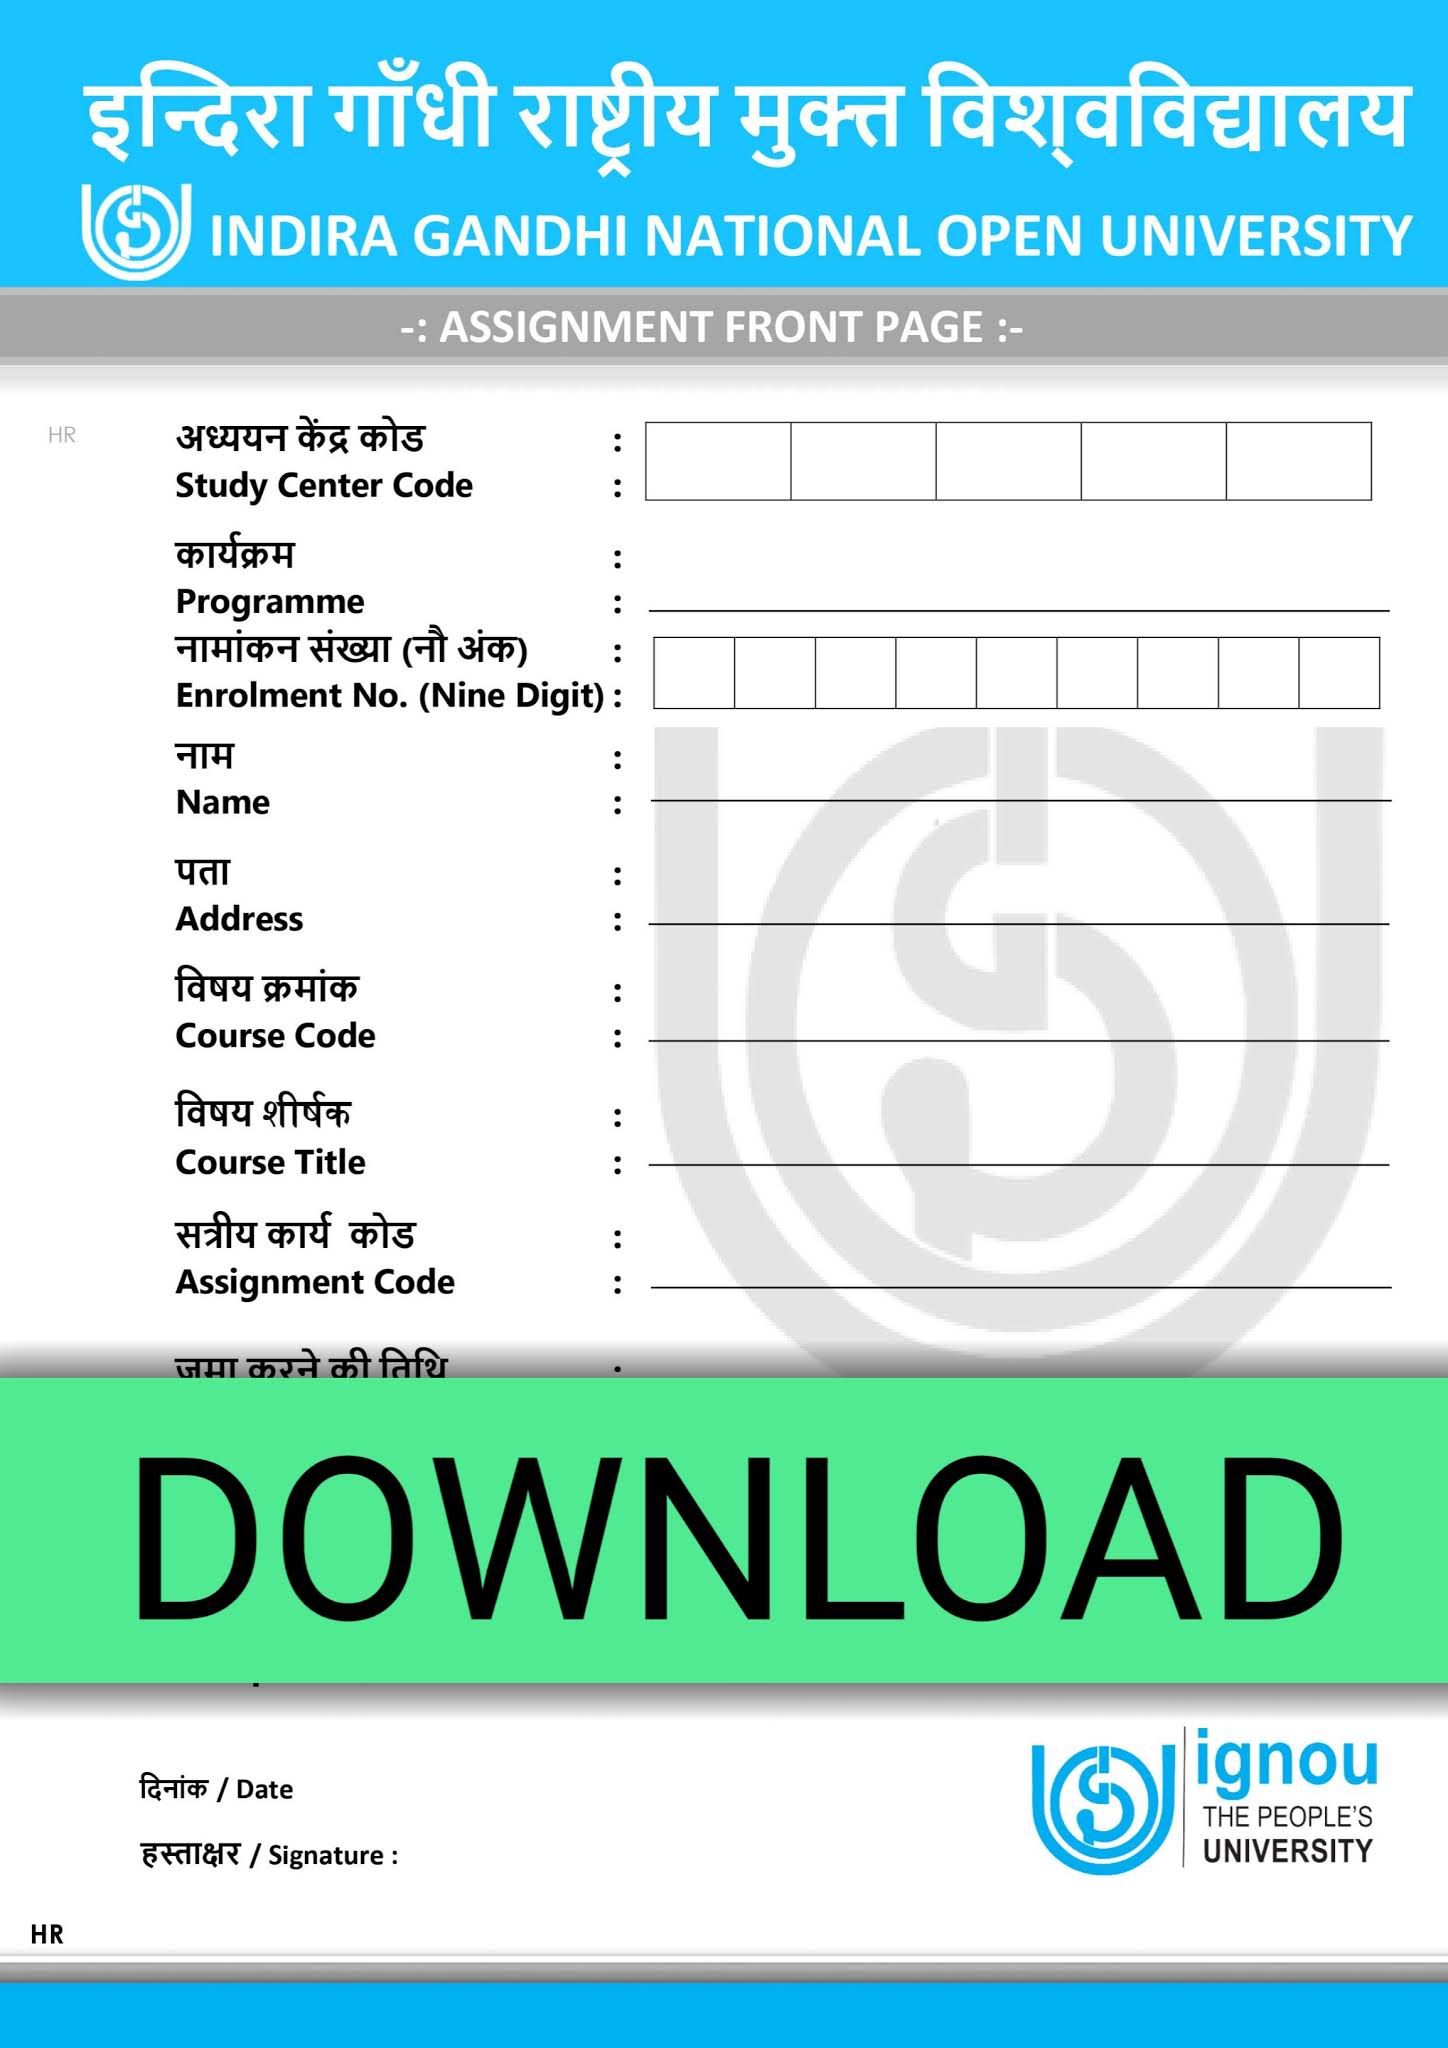 how to download front page of ignou assignment